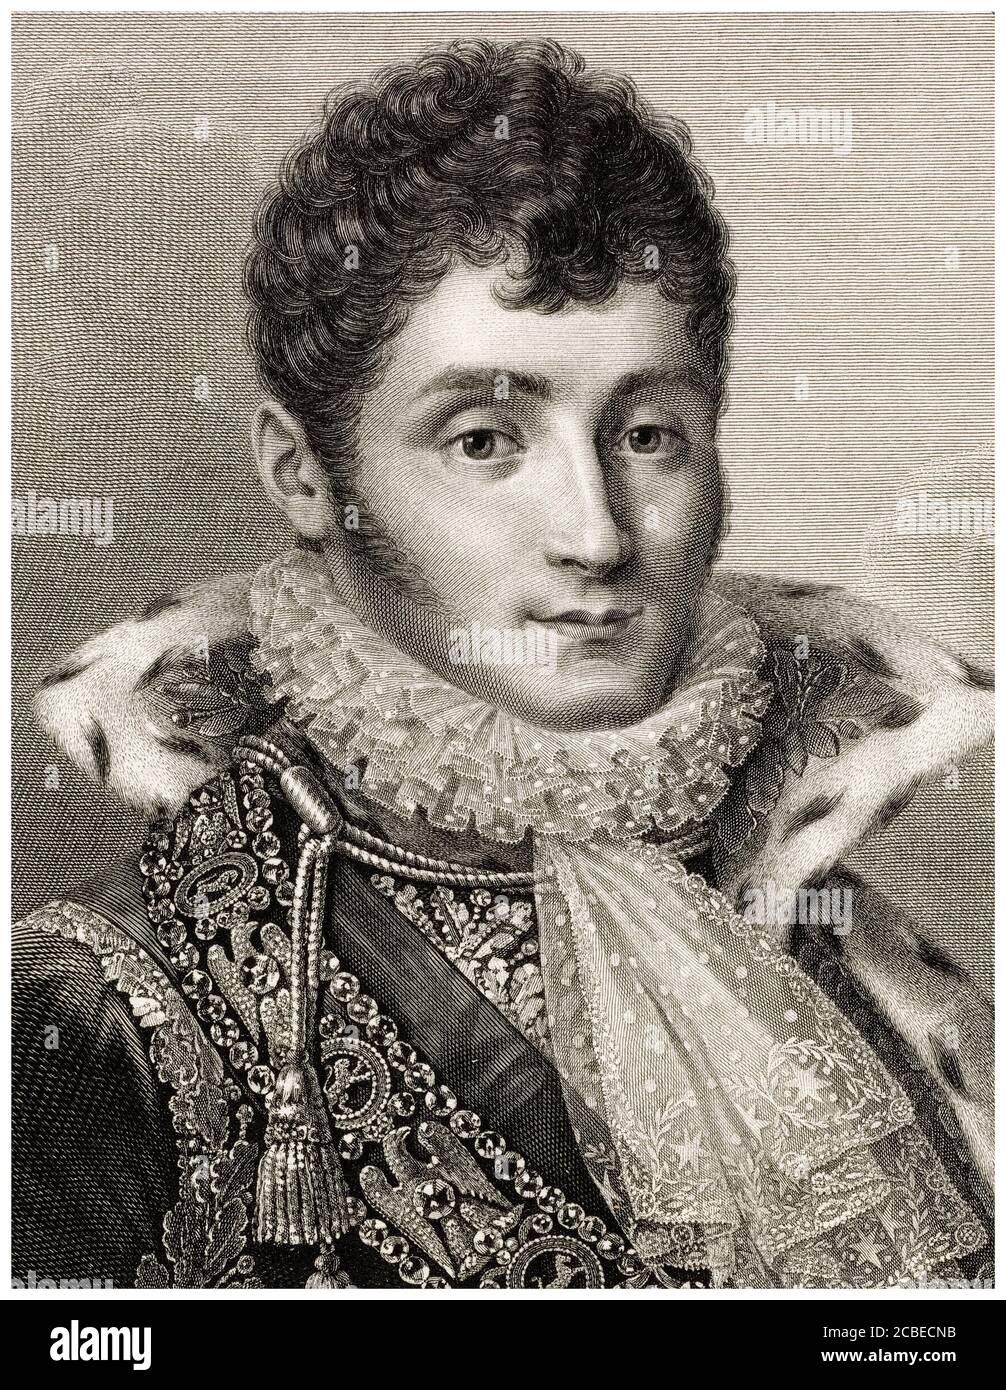 Jérôme-Napoléon Bonaparte (1784-1860), King of Westphalia, French Prince, engraving by Christian-Friedrich Muller and Johann Gotthard von Muller, before 1816 Stock Photo